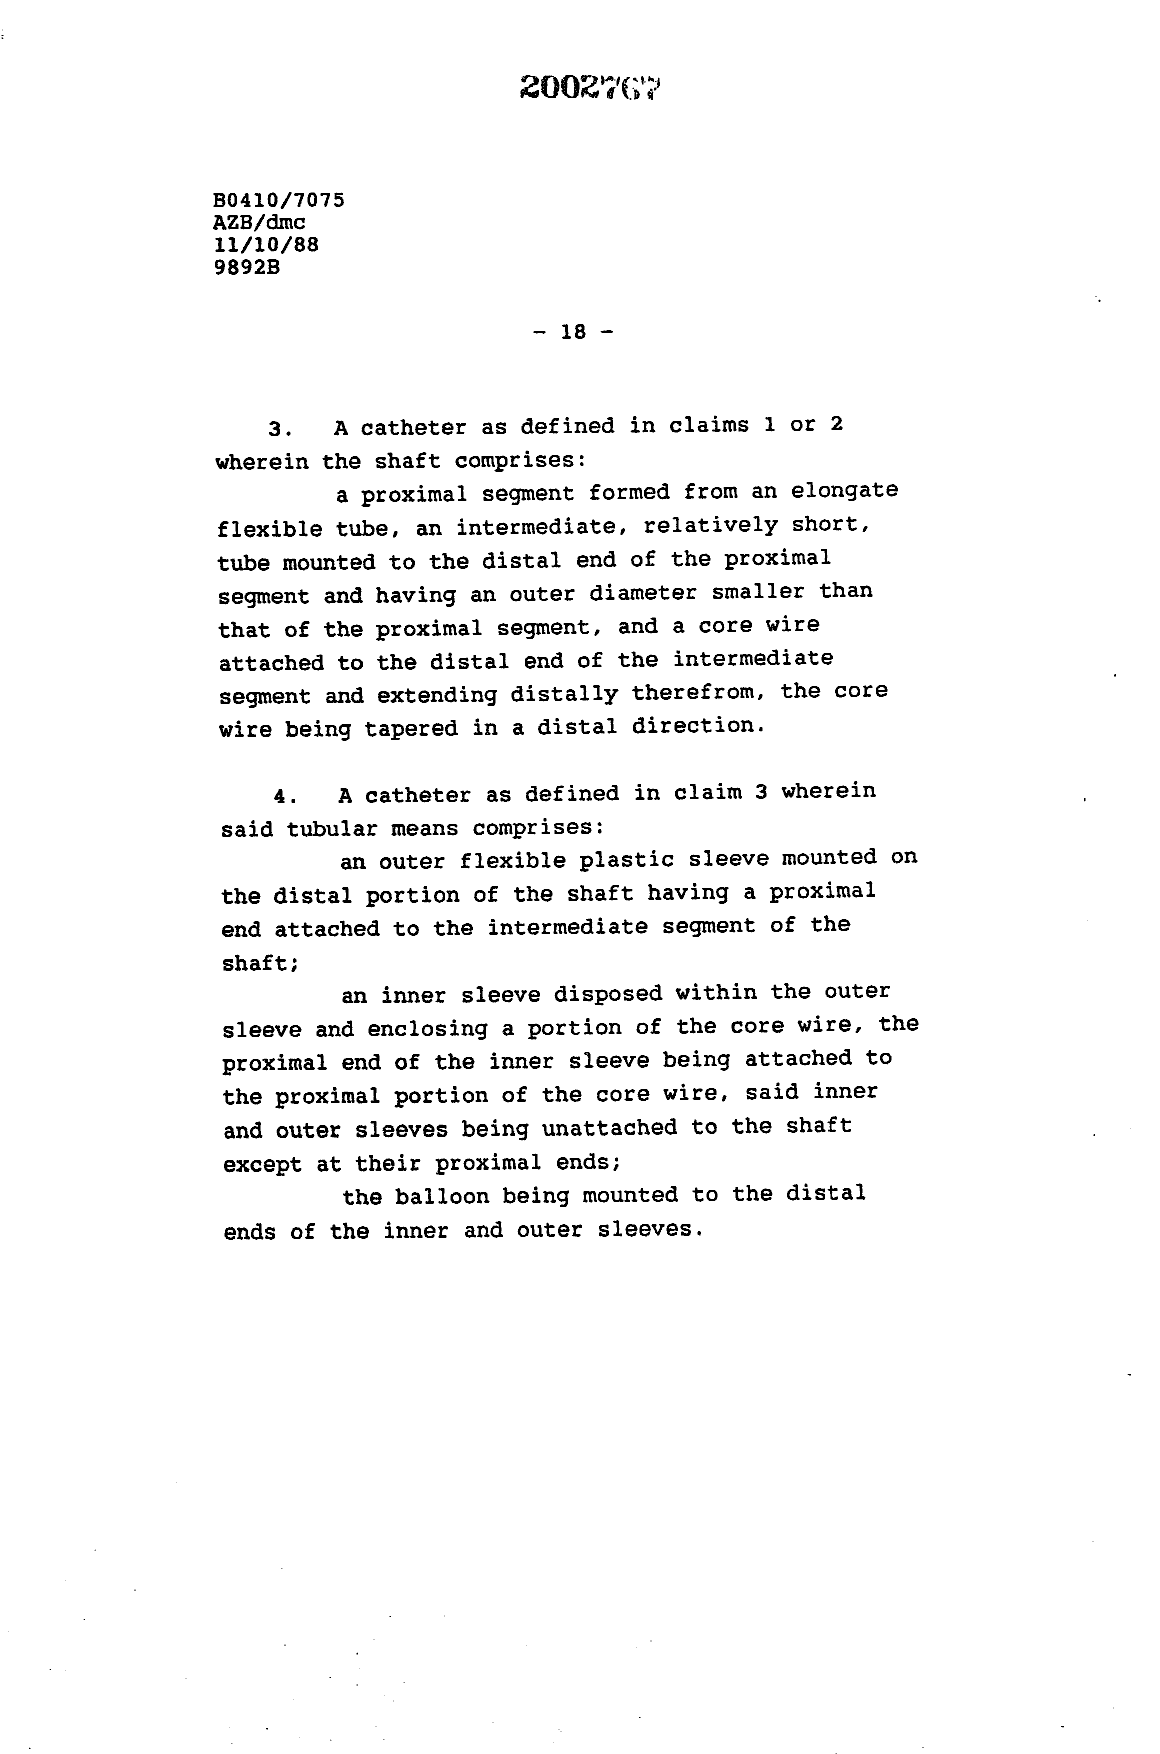 Canadian Patent Document 2002767. Claims 19900510. Image 2 of 11